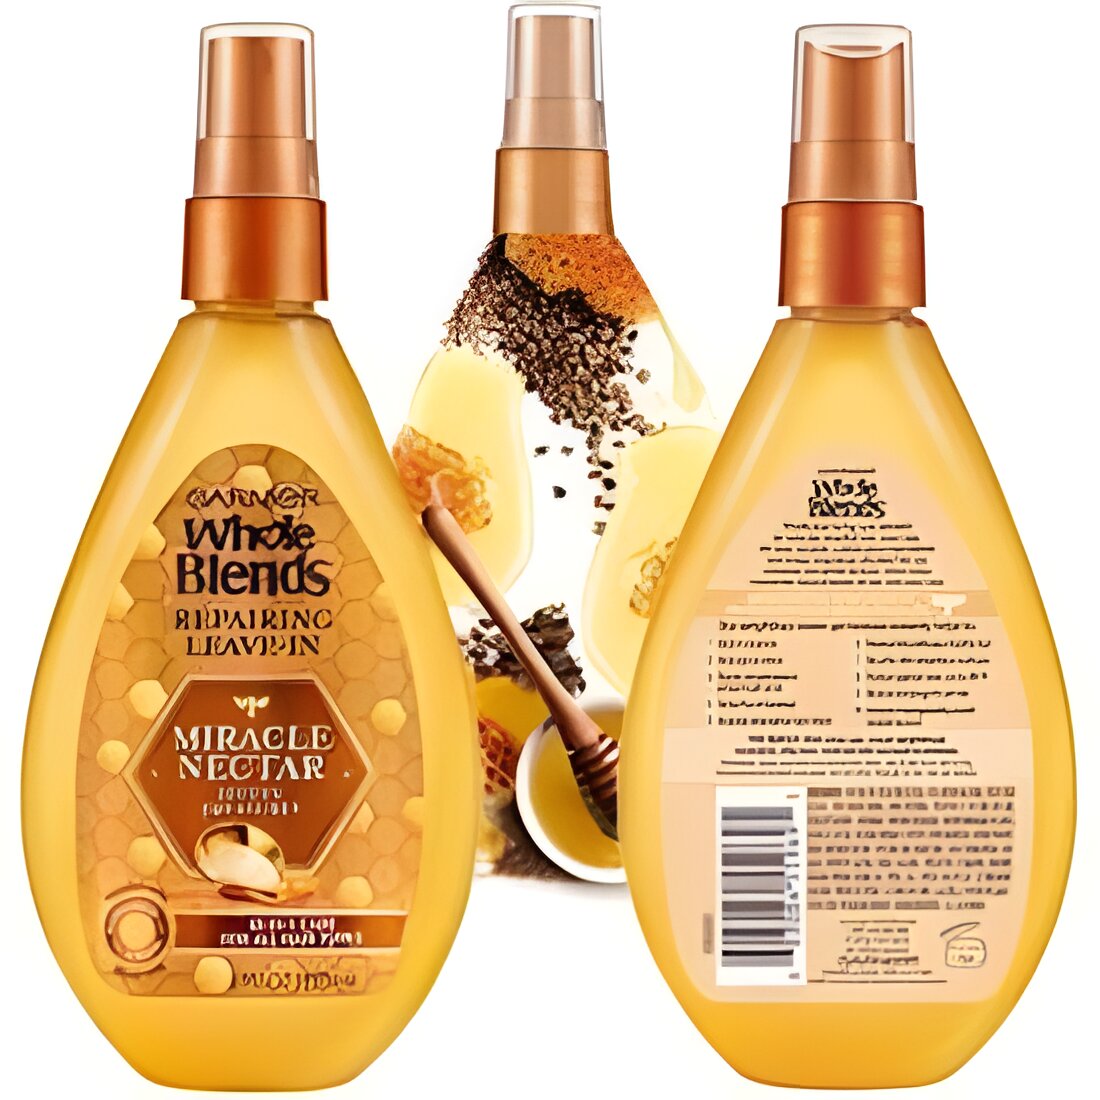 Free Garnier Whole Blends Miracle Nectar Repairing Leave-In Treatment Sample